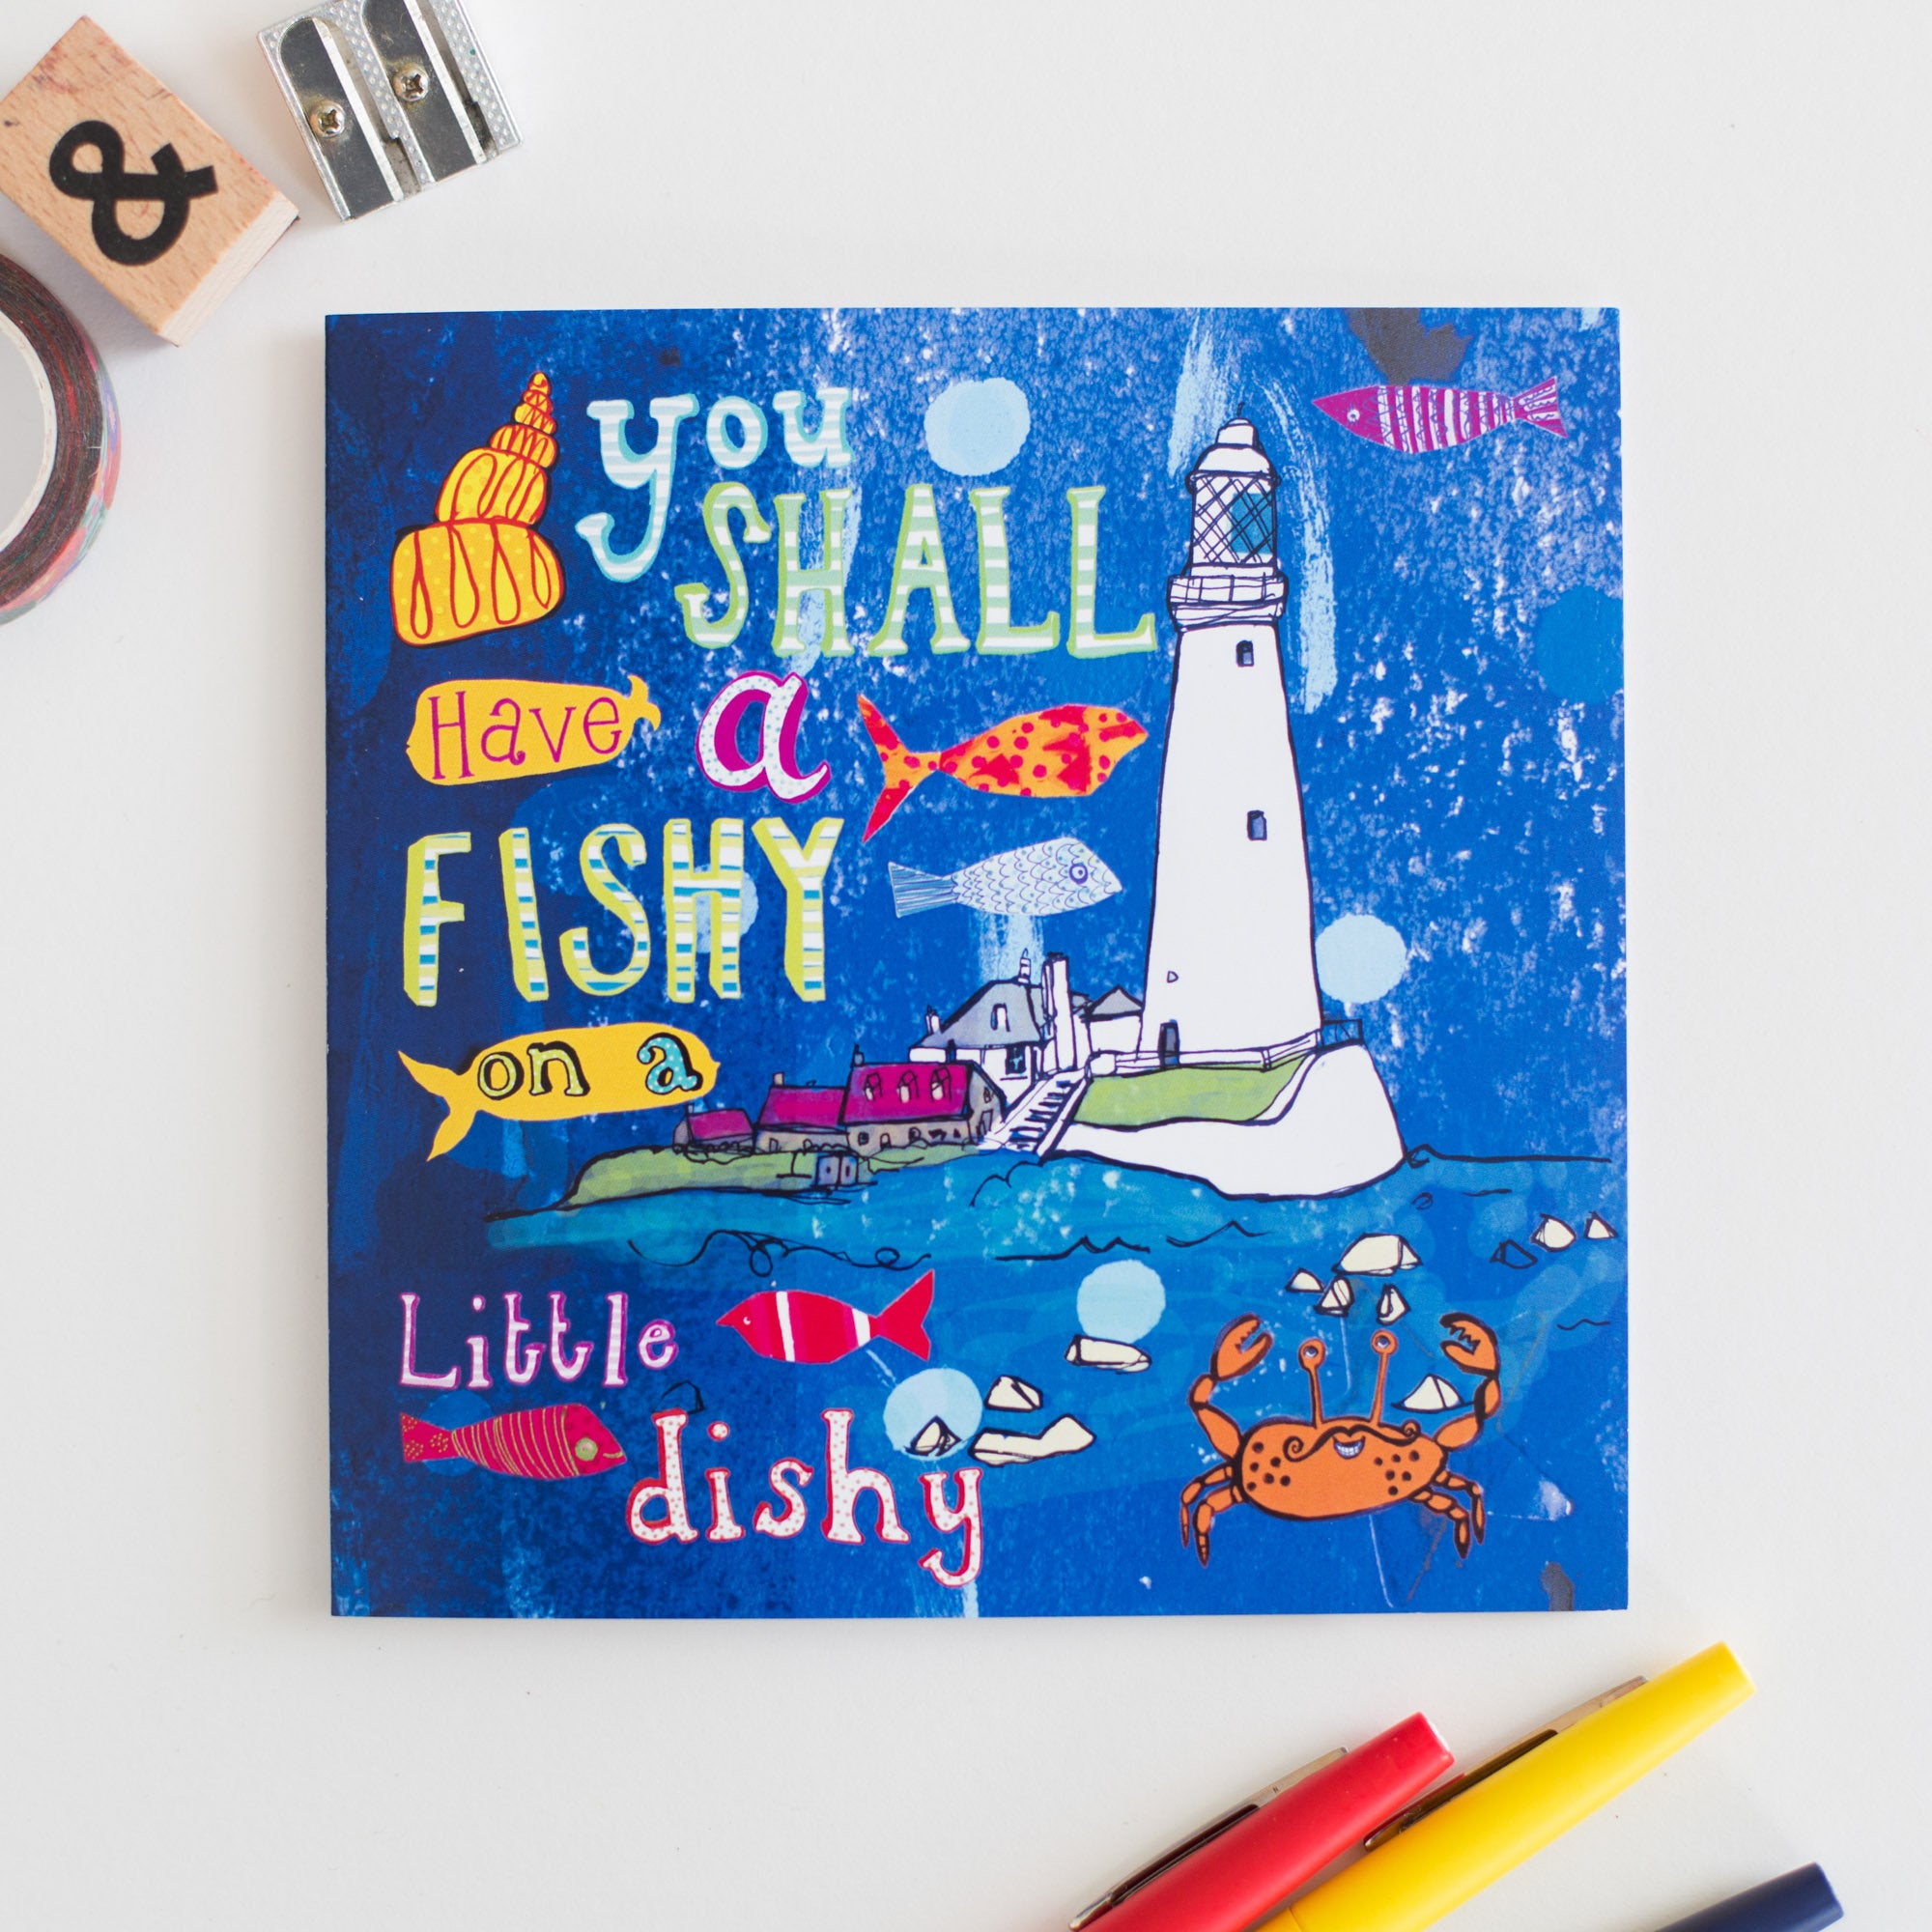 'You Shall Have a Fishy...' Greetings Card